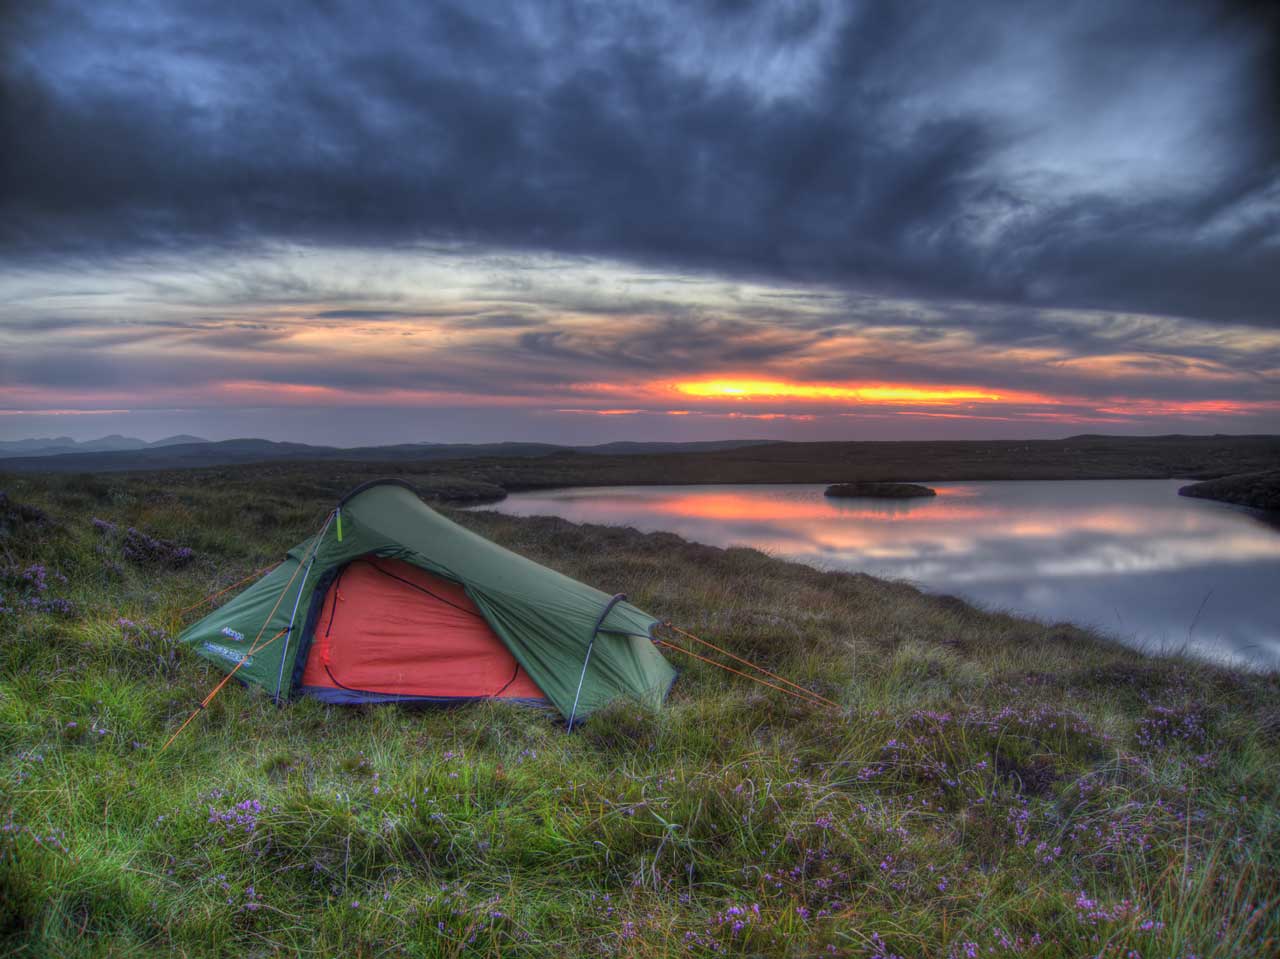 Sunset while camping on the Isle of Lewis